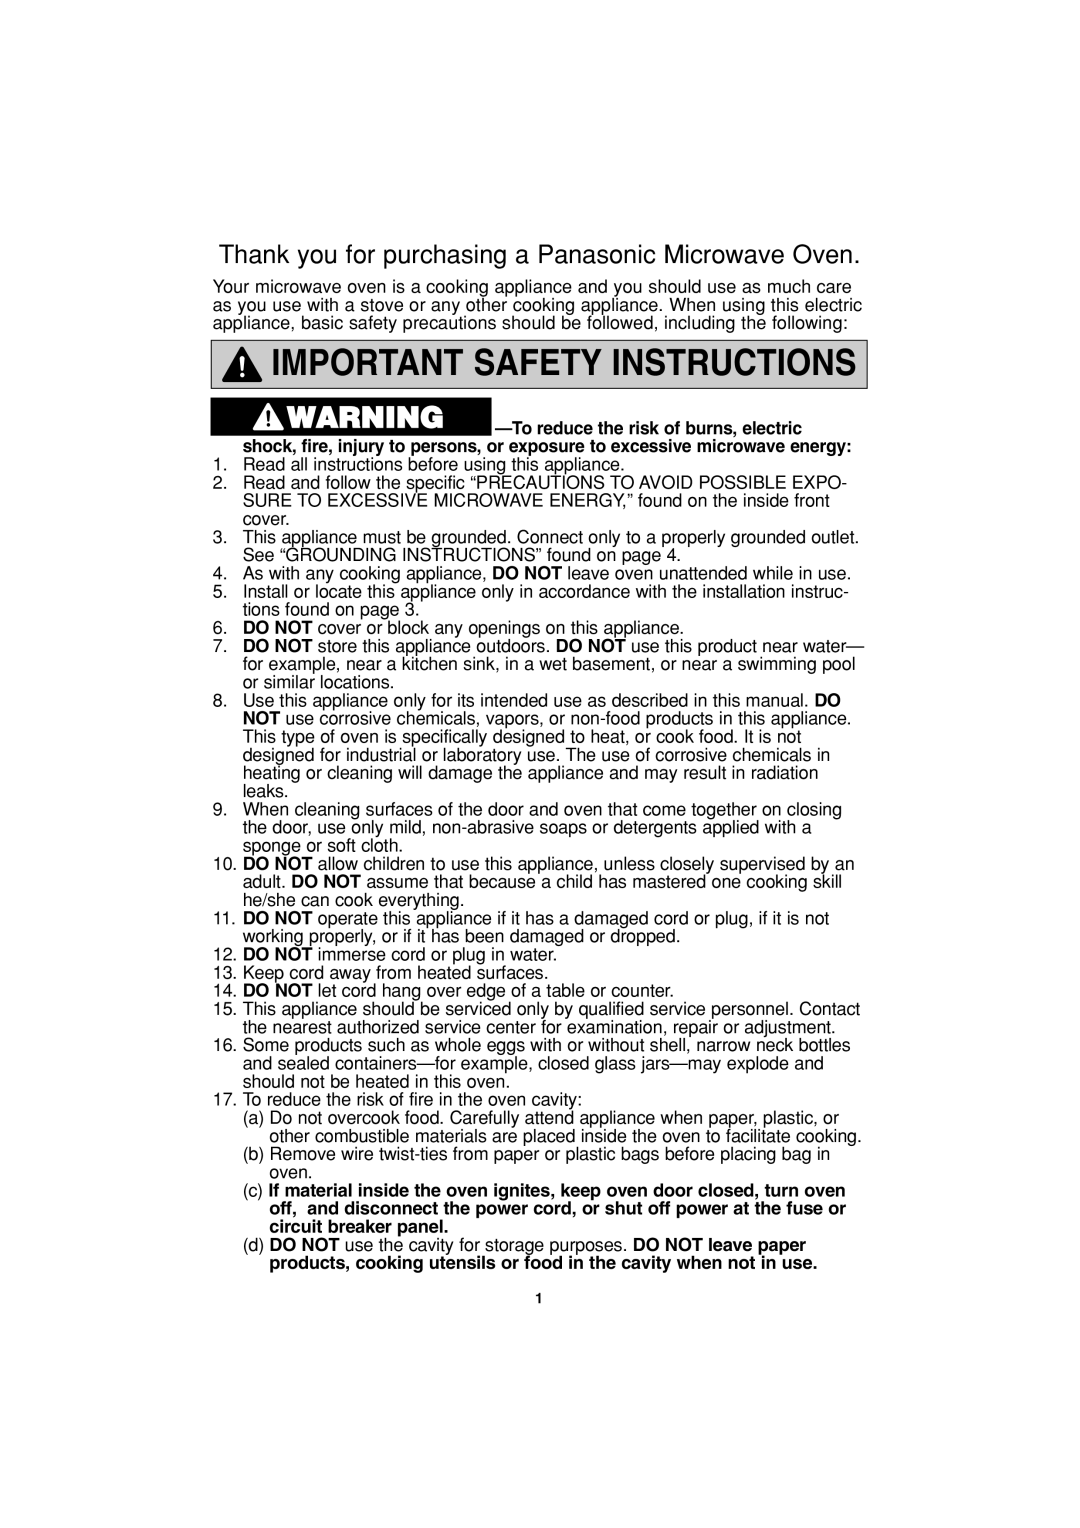 Panasonic NN-S423 Important Safety Instructions, Thank you for purchasing a Panasonic Microwave Oven 